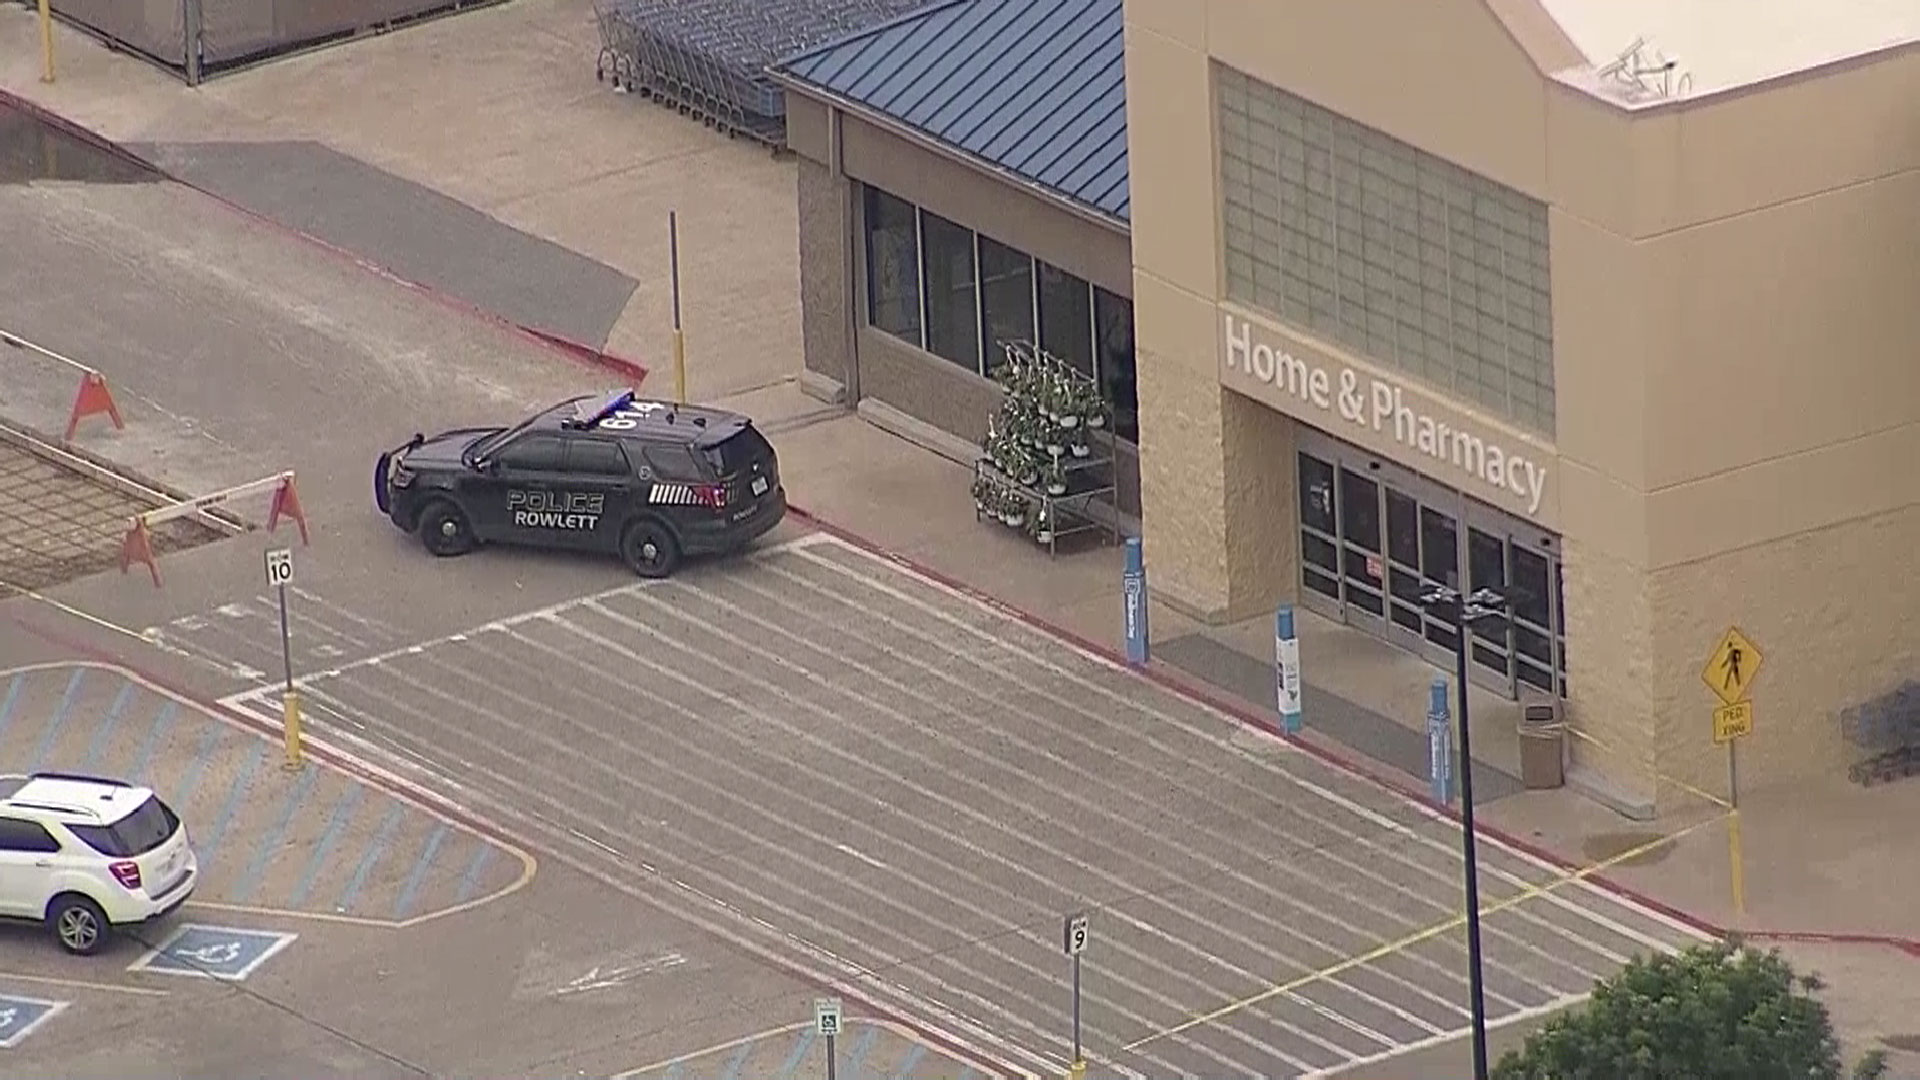 Rowlett Walmart Reopens After Suspicious Package Found